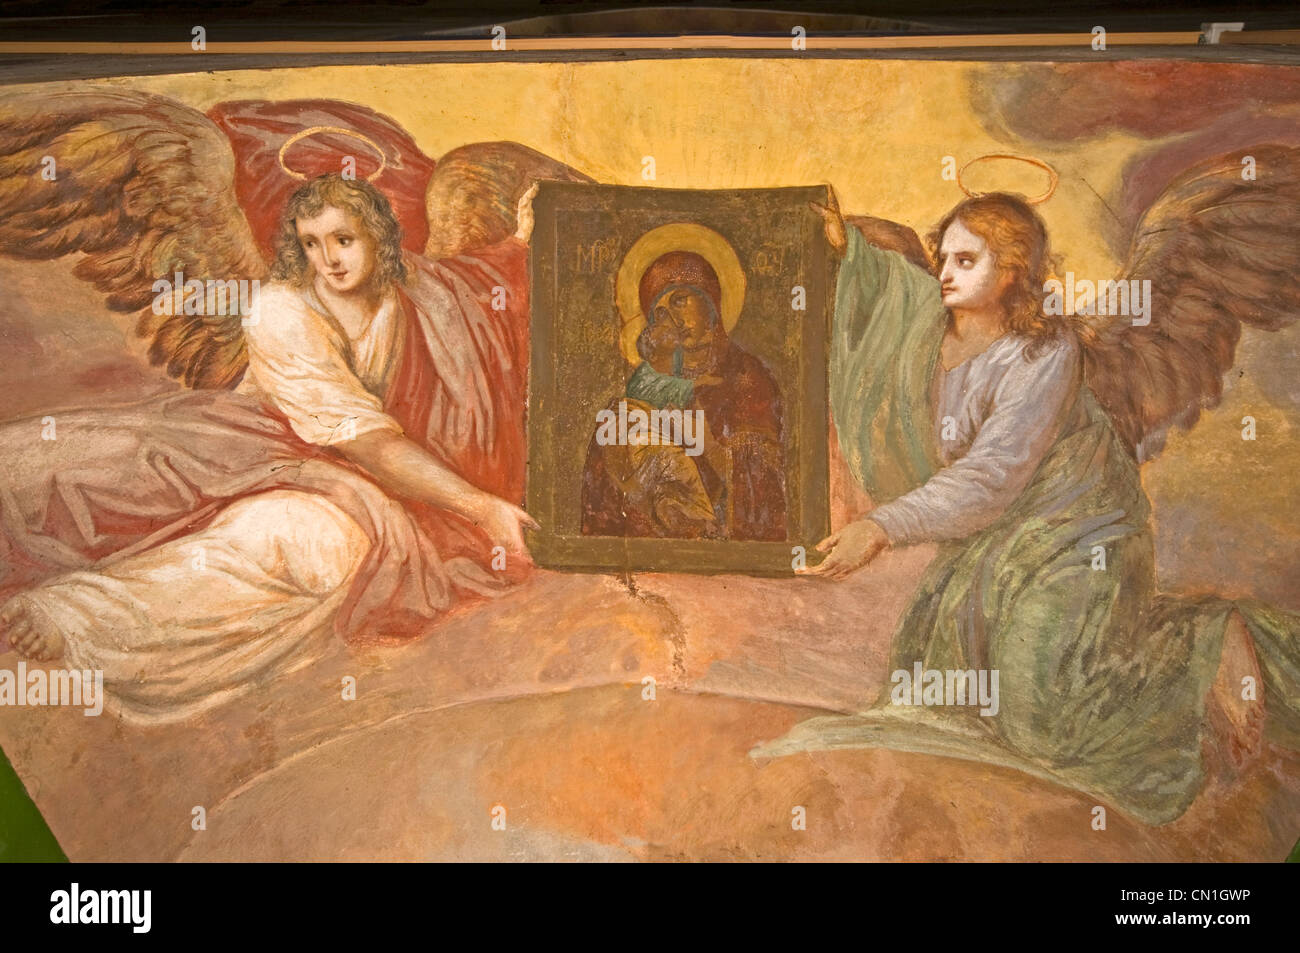 RUSSIA Uglich Russian Orthodox Church of the Nativity of St John the Baptist (1690) fresco with angels Stock Photo